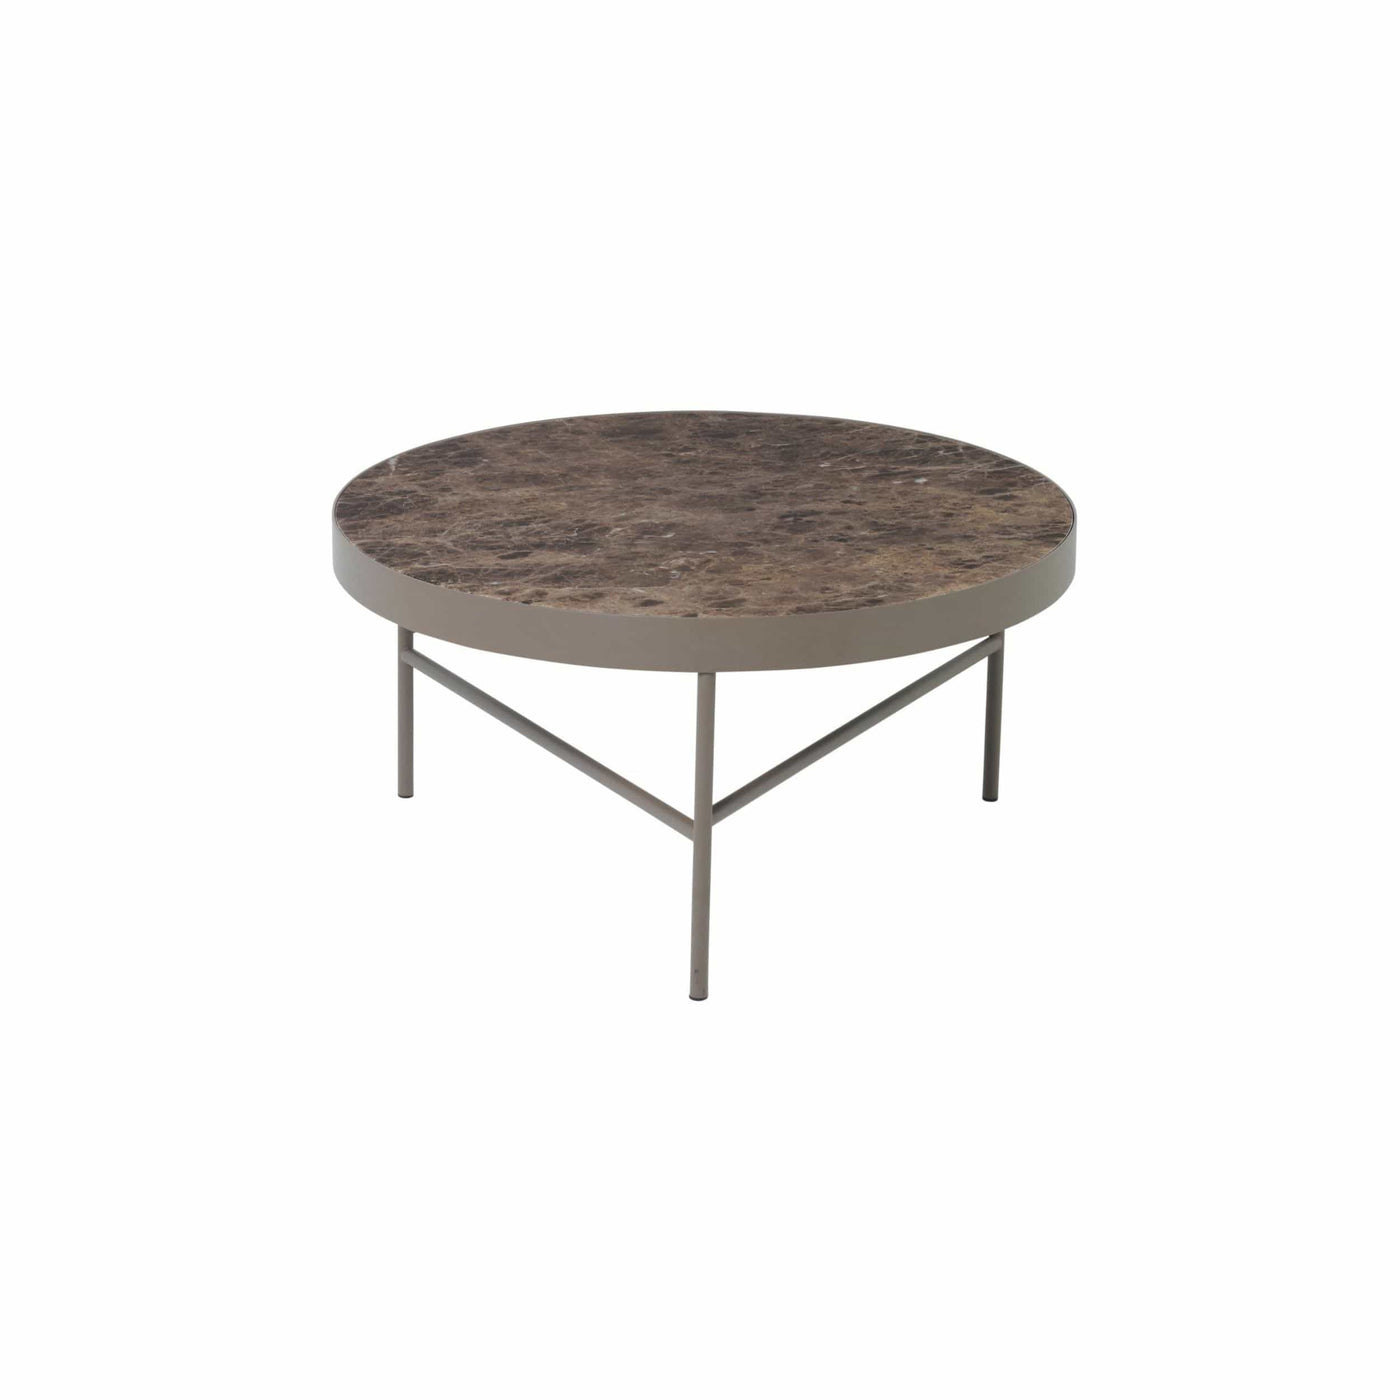 ferm LIVING Marble Table Large. Free UK delivery at someday designs. #colour_brown